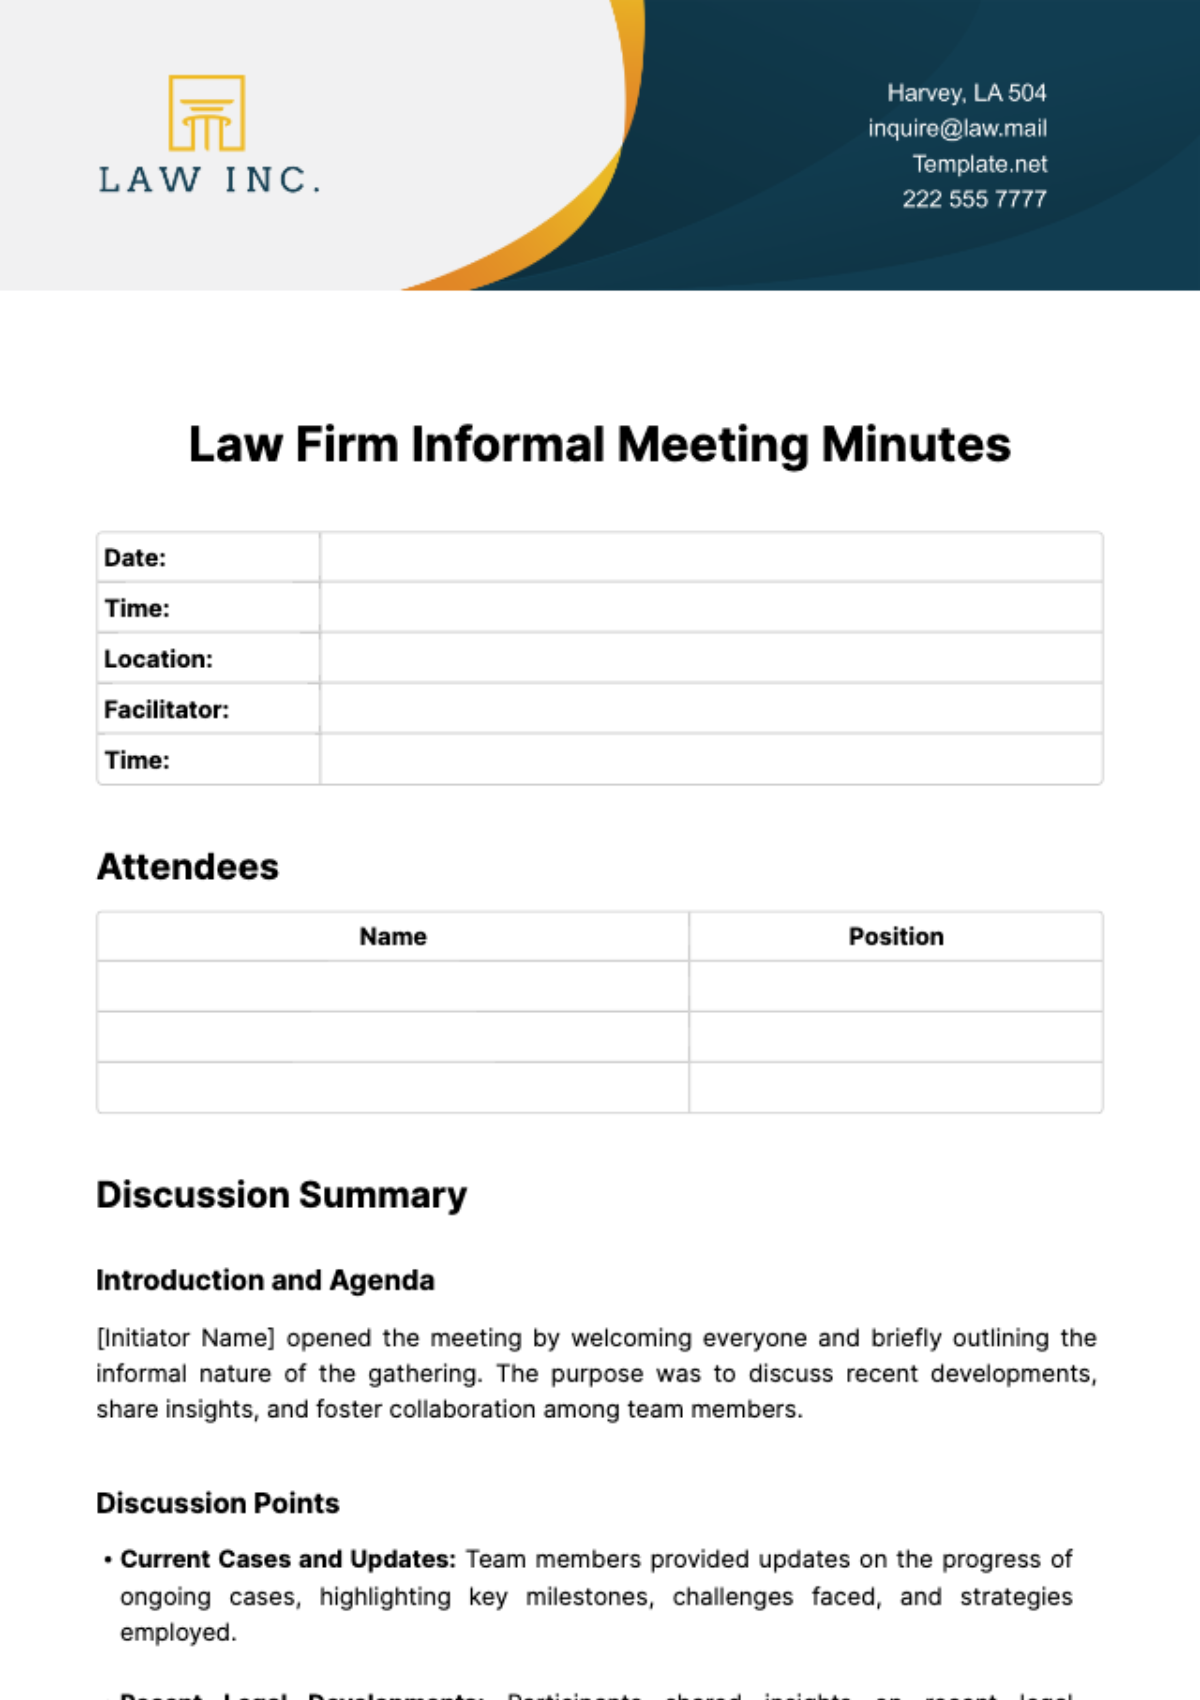 Free Law Firm Informal Meeting Minutes Template